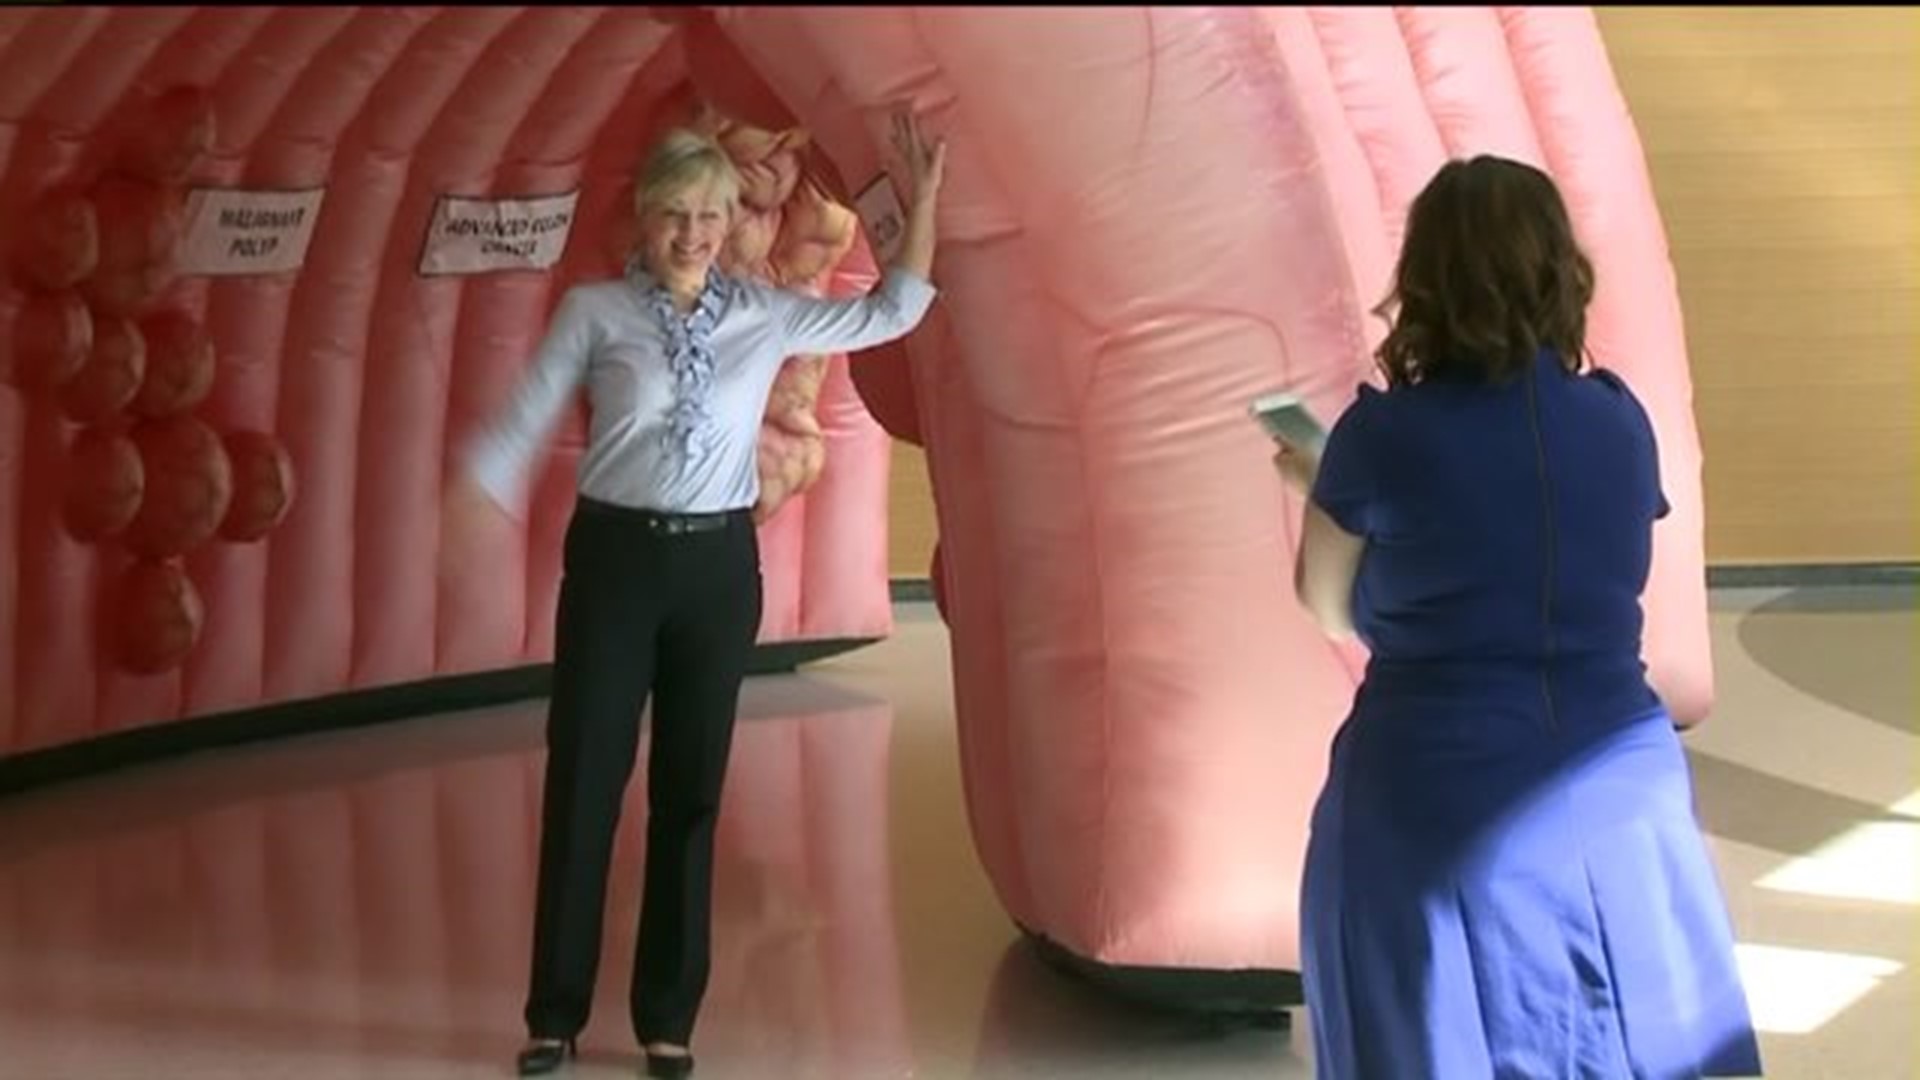 Larger Than Life Inflatable Colon Greets Visitors in Lycoming County